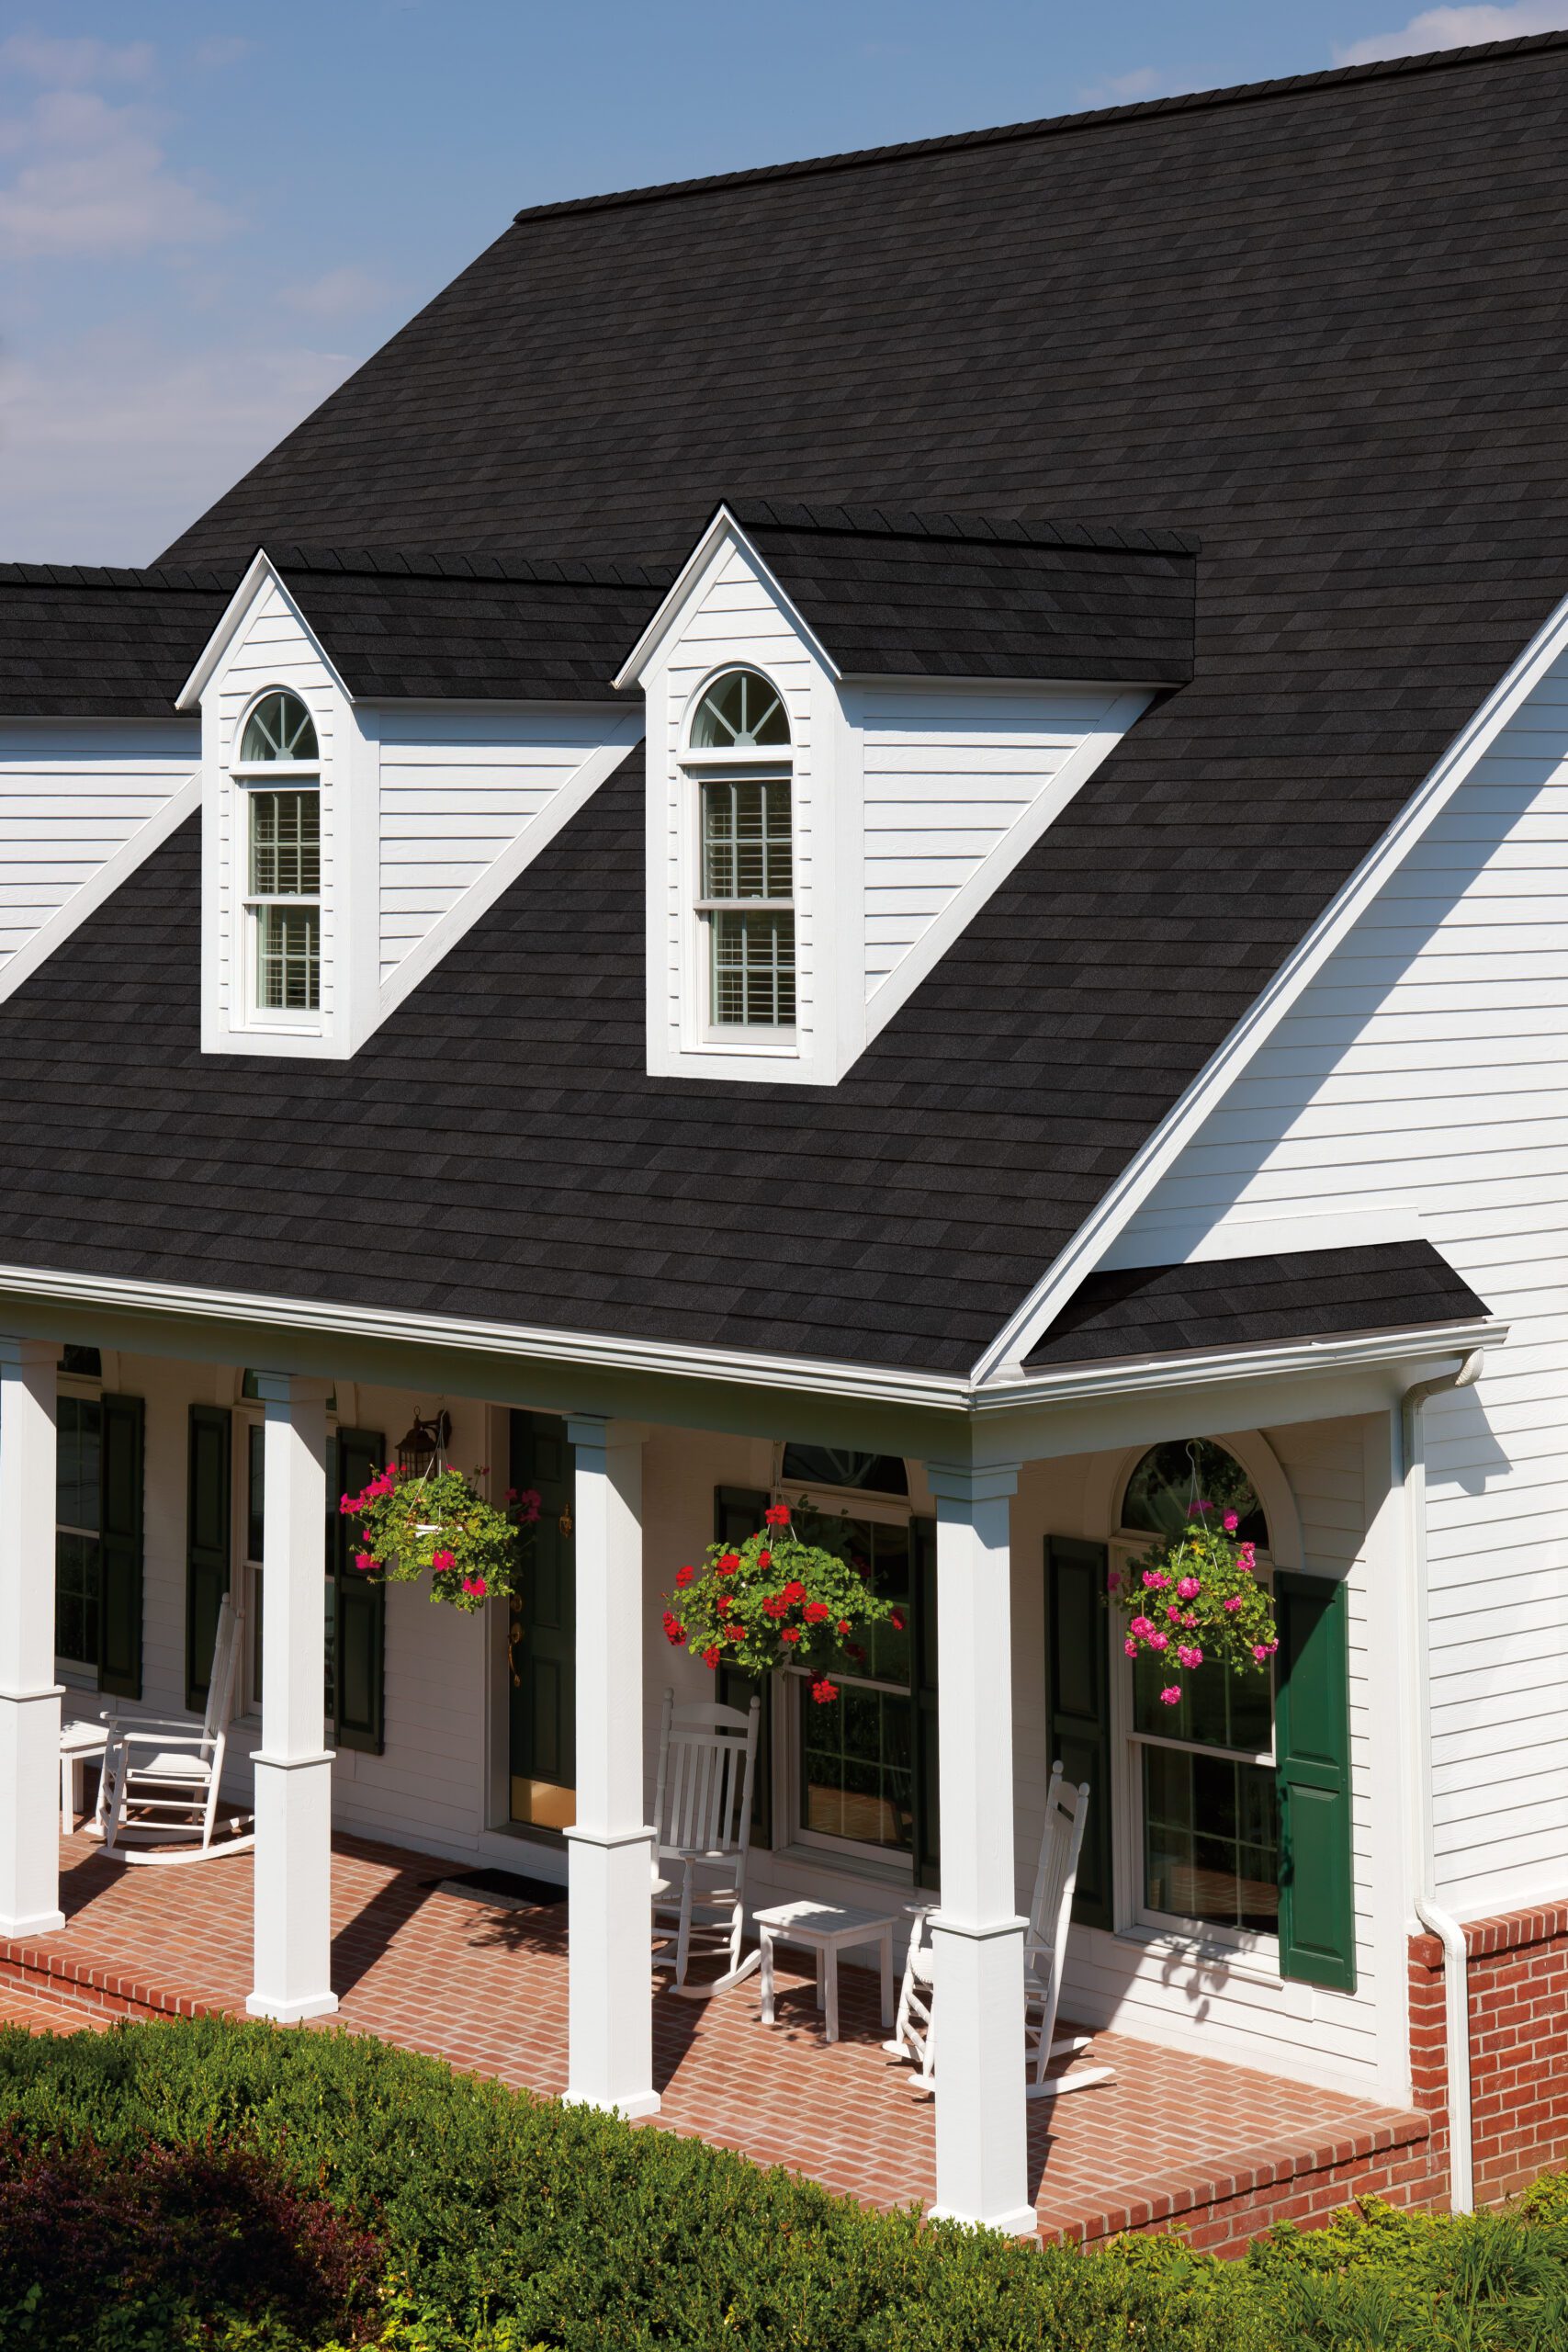 Owens Corning Onyx Black, replacement roof rhode island, roofing company johnston ri, roofing johnston ri, roofing ri, hire roofing company rhode island, roofers rhode island, quality roofing company ri, reliable roofing company ri